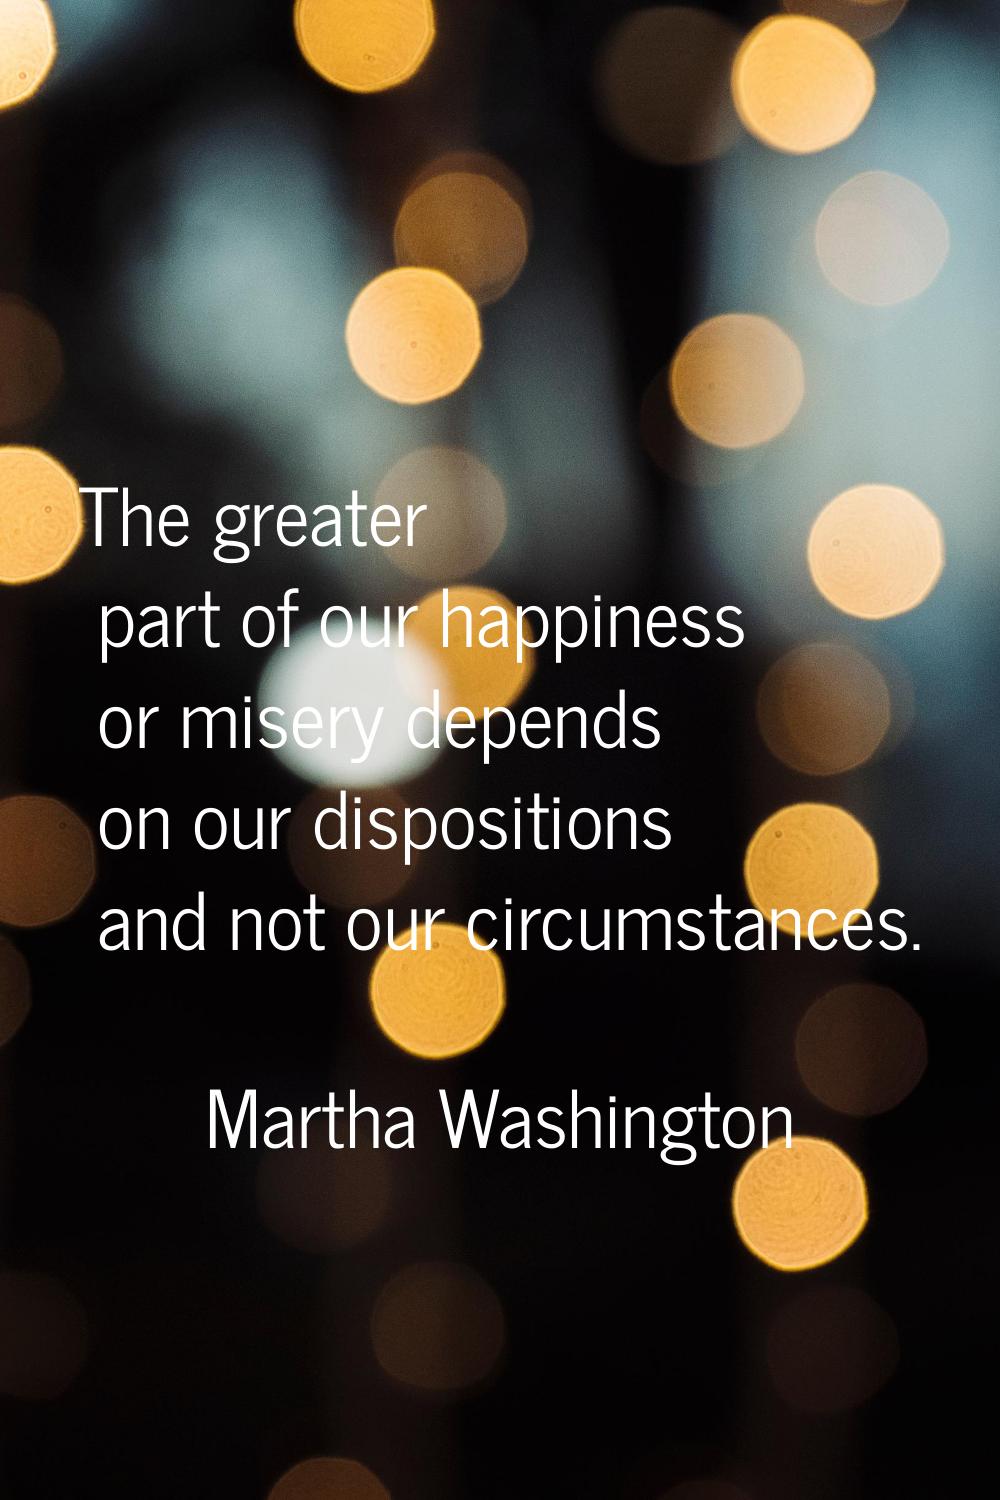 The greater part of our happiness or misery depends on our dispositions and not our circumstances.